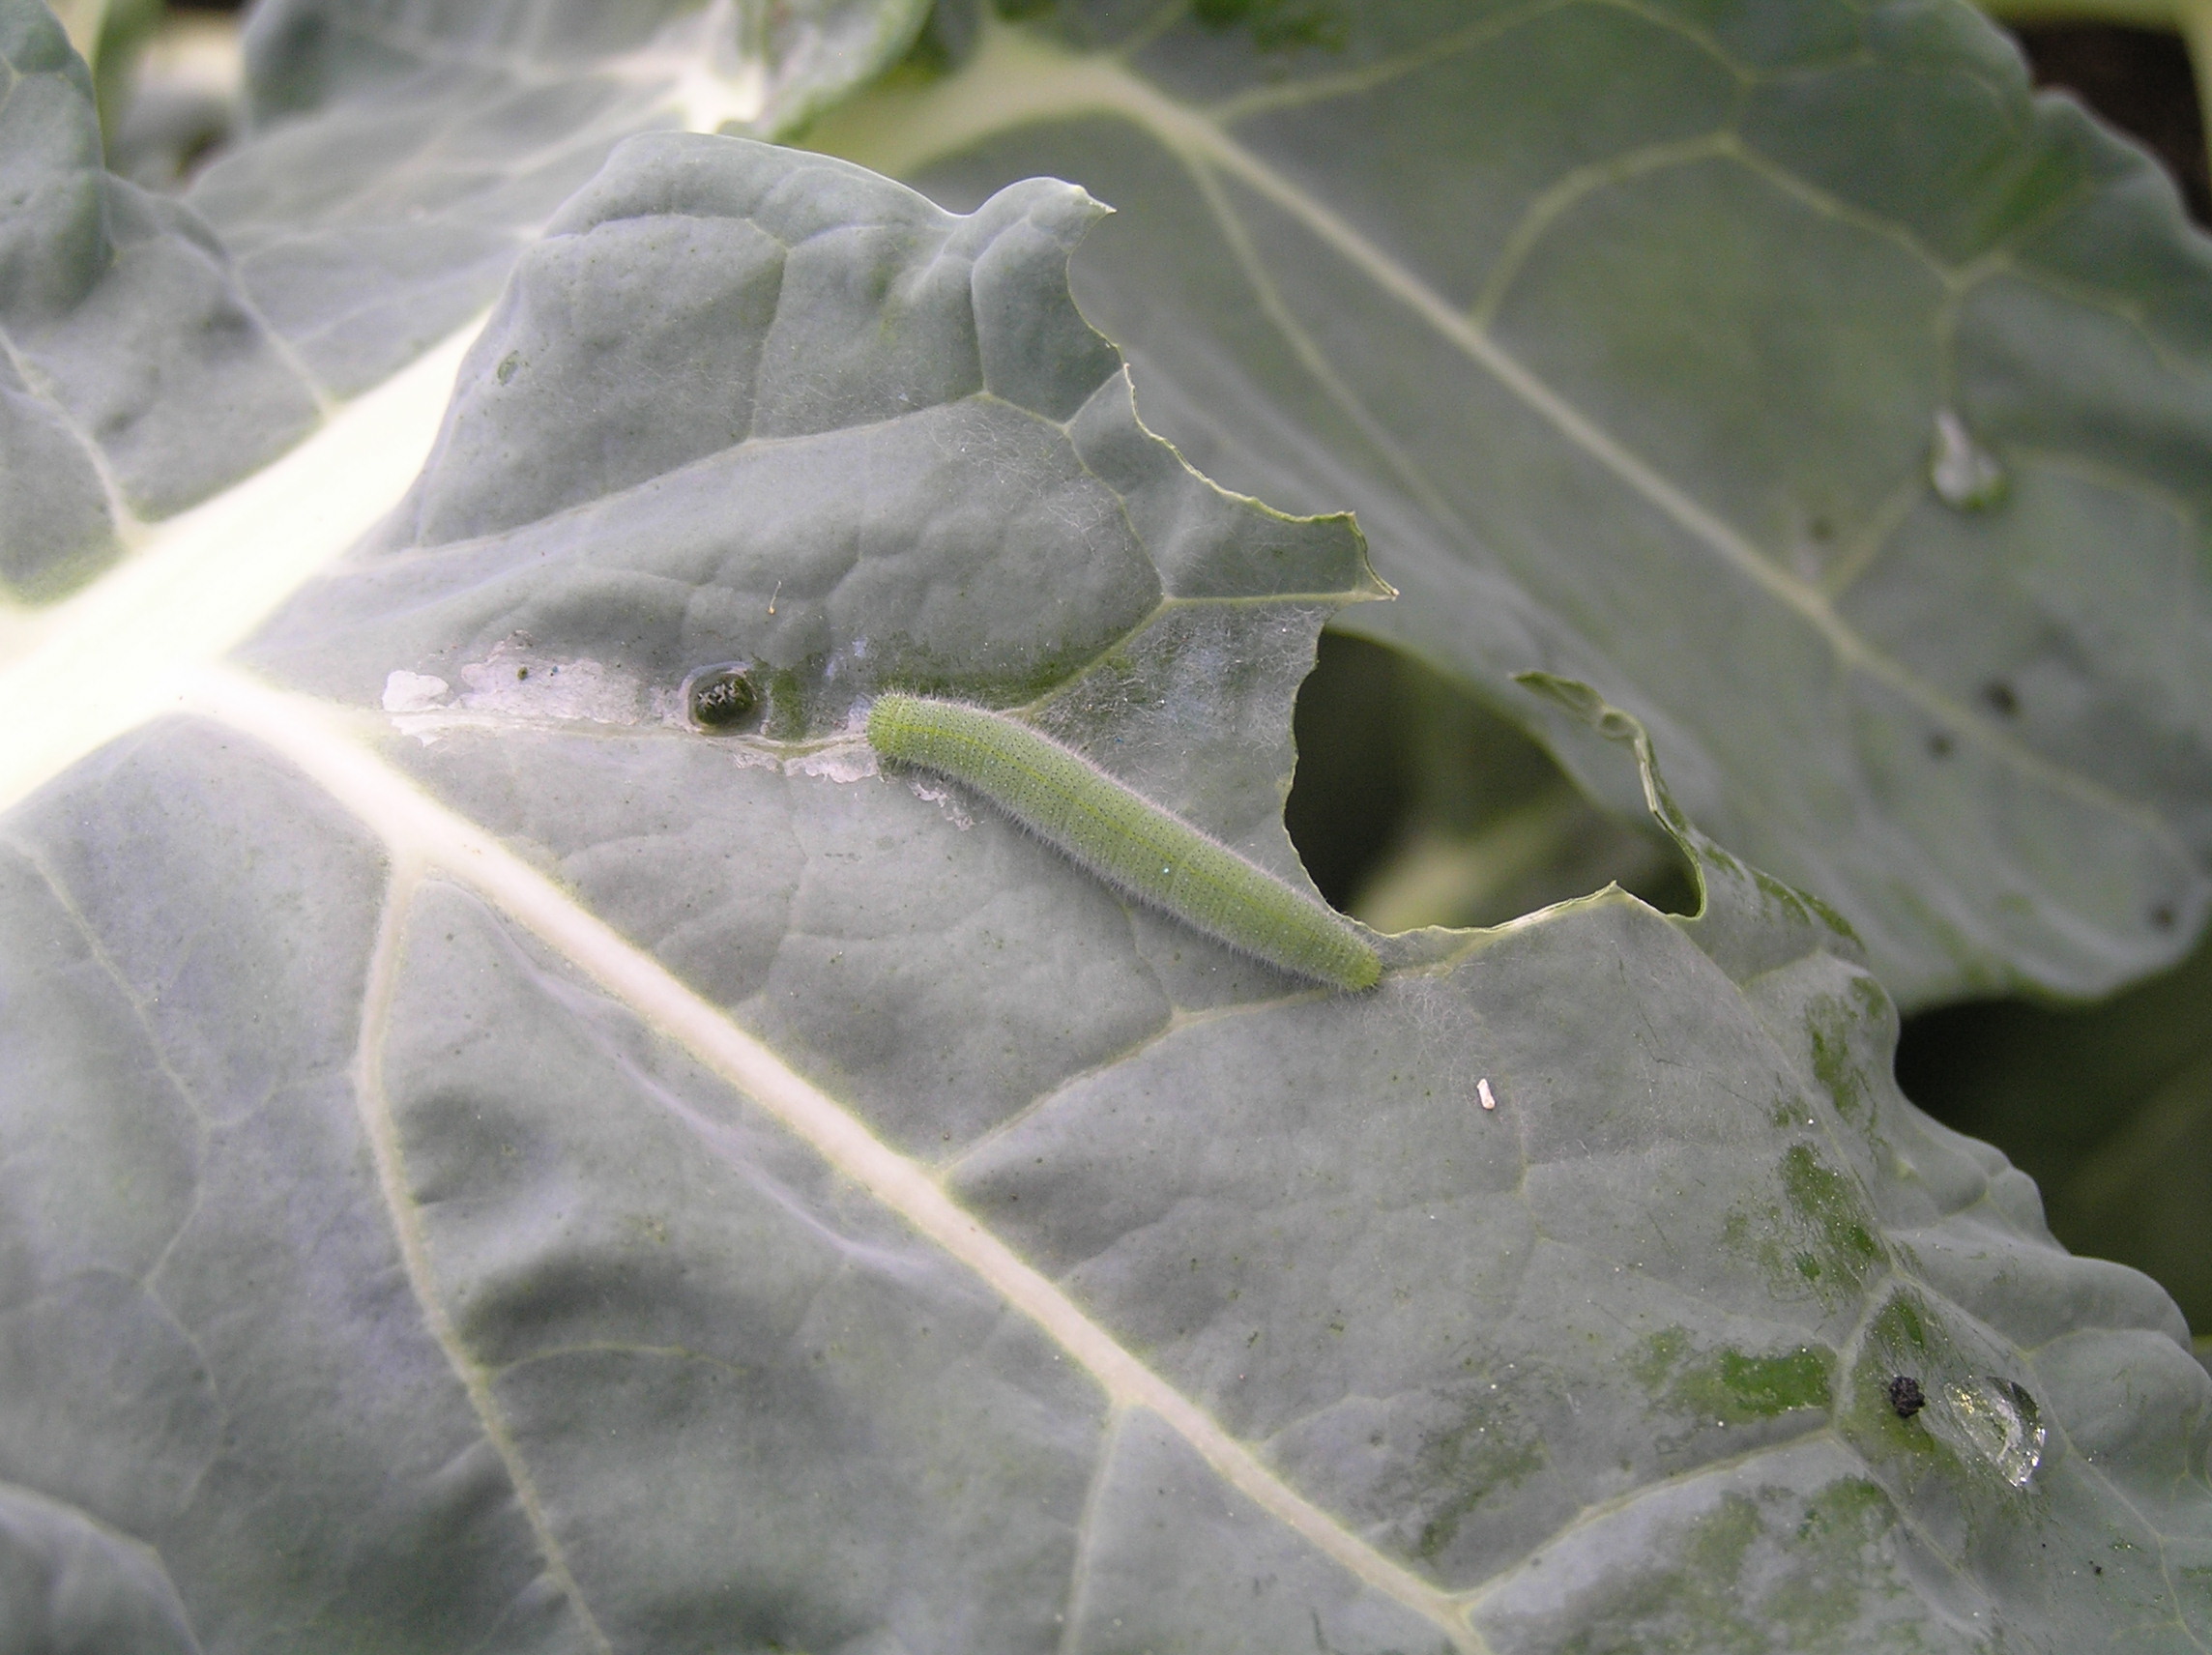 Cabbage White Butterfly Larvae